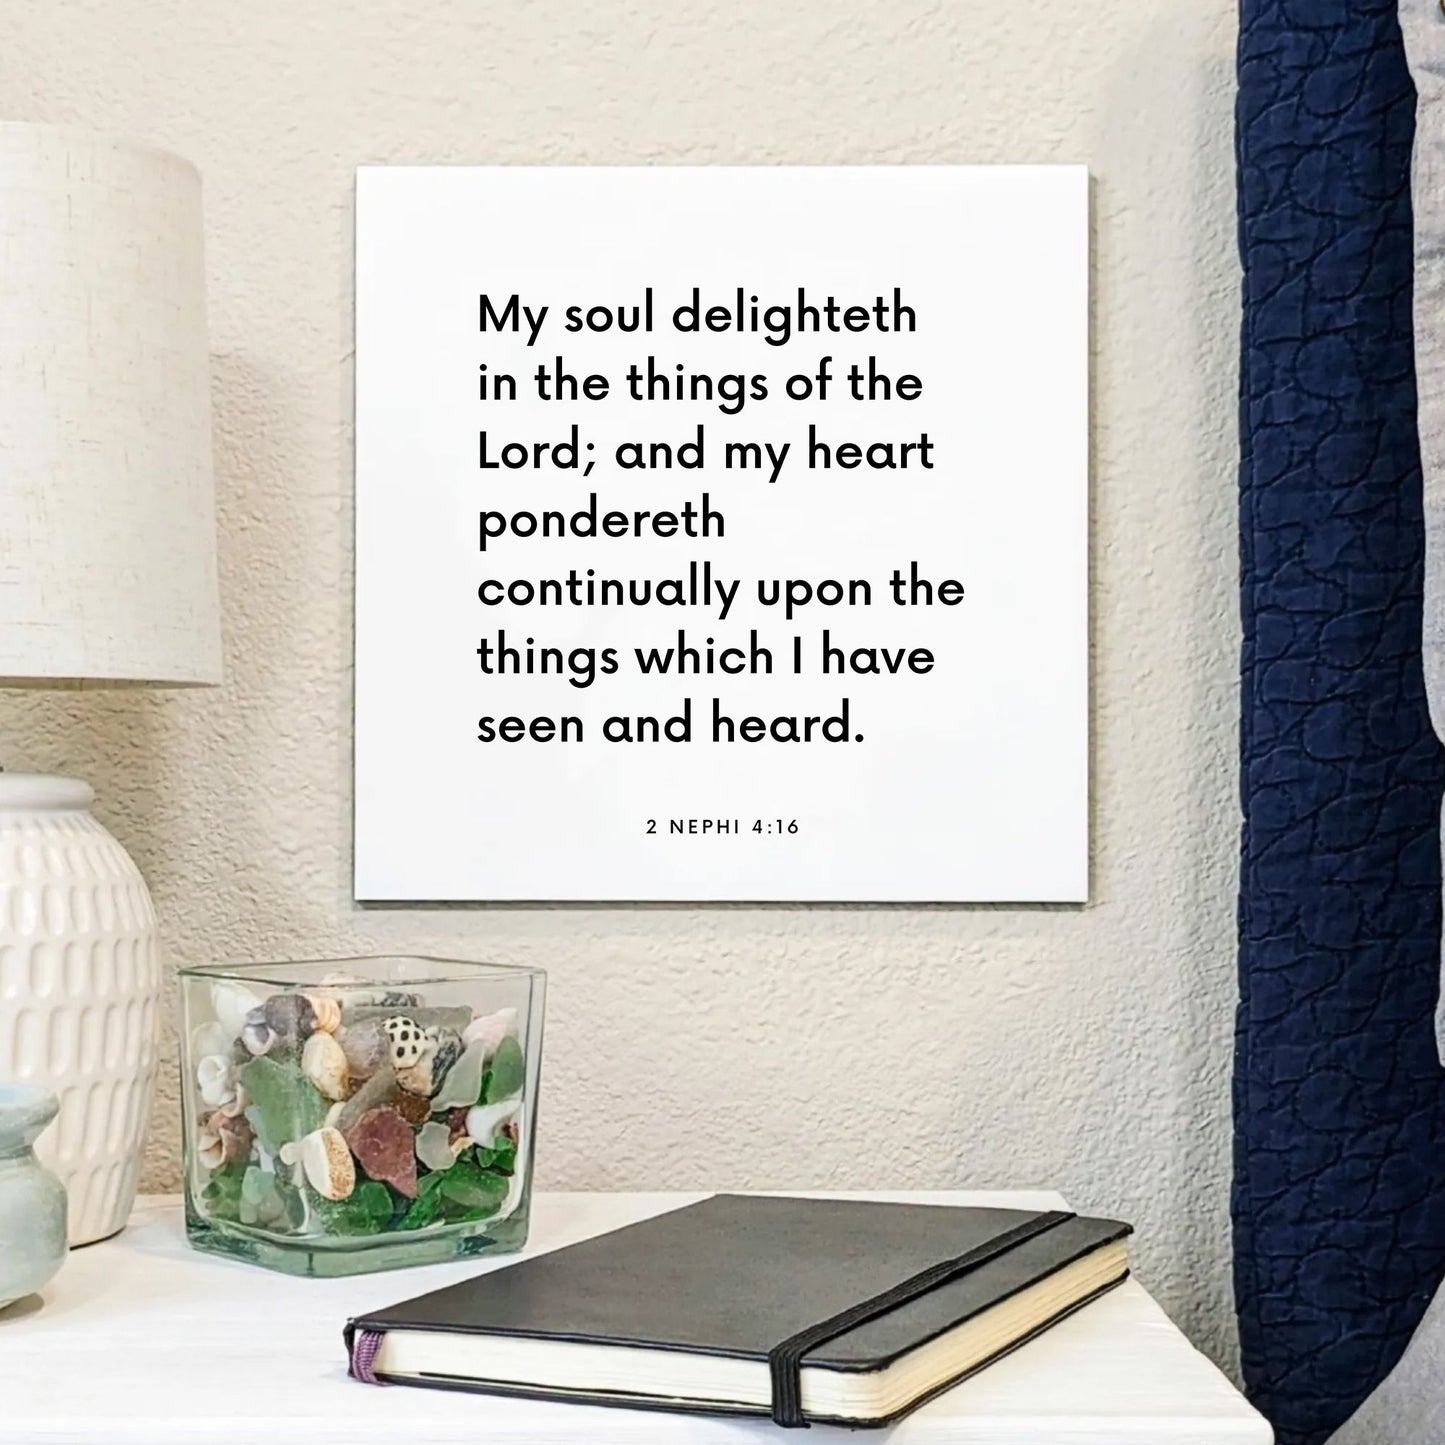 Bedside mouting of the scripture tile for 2 Nephi 4:16 - "My soul delighteth in the things of the Lord"